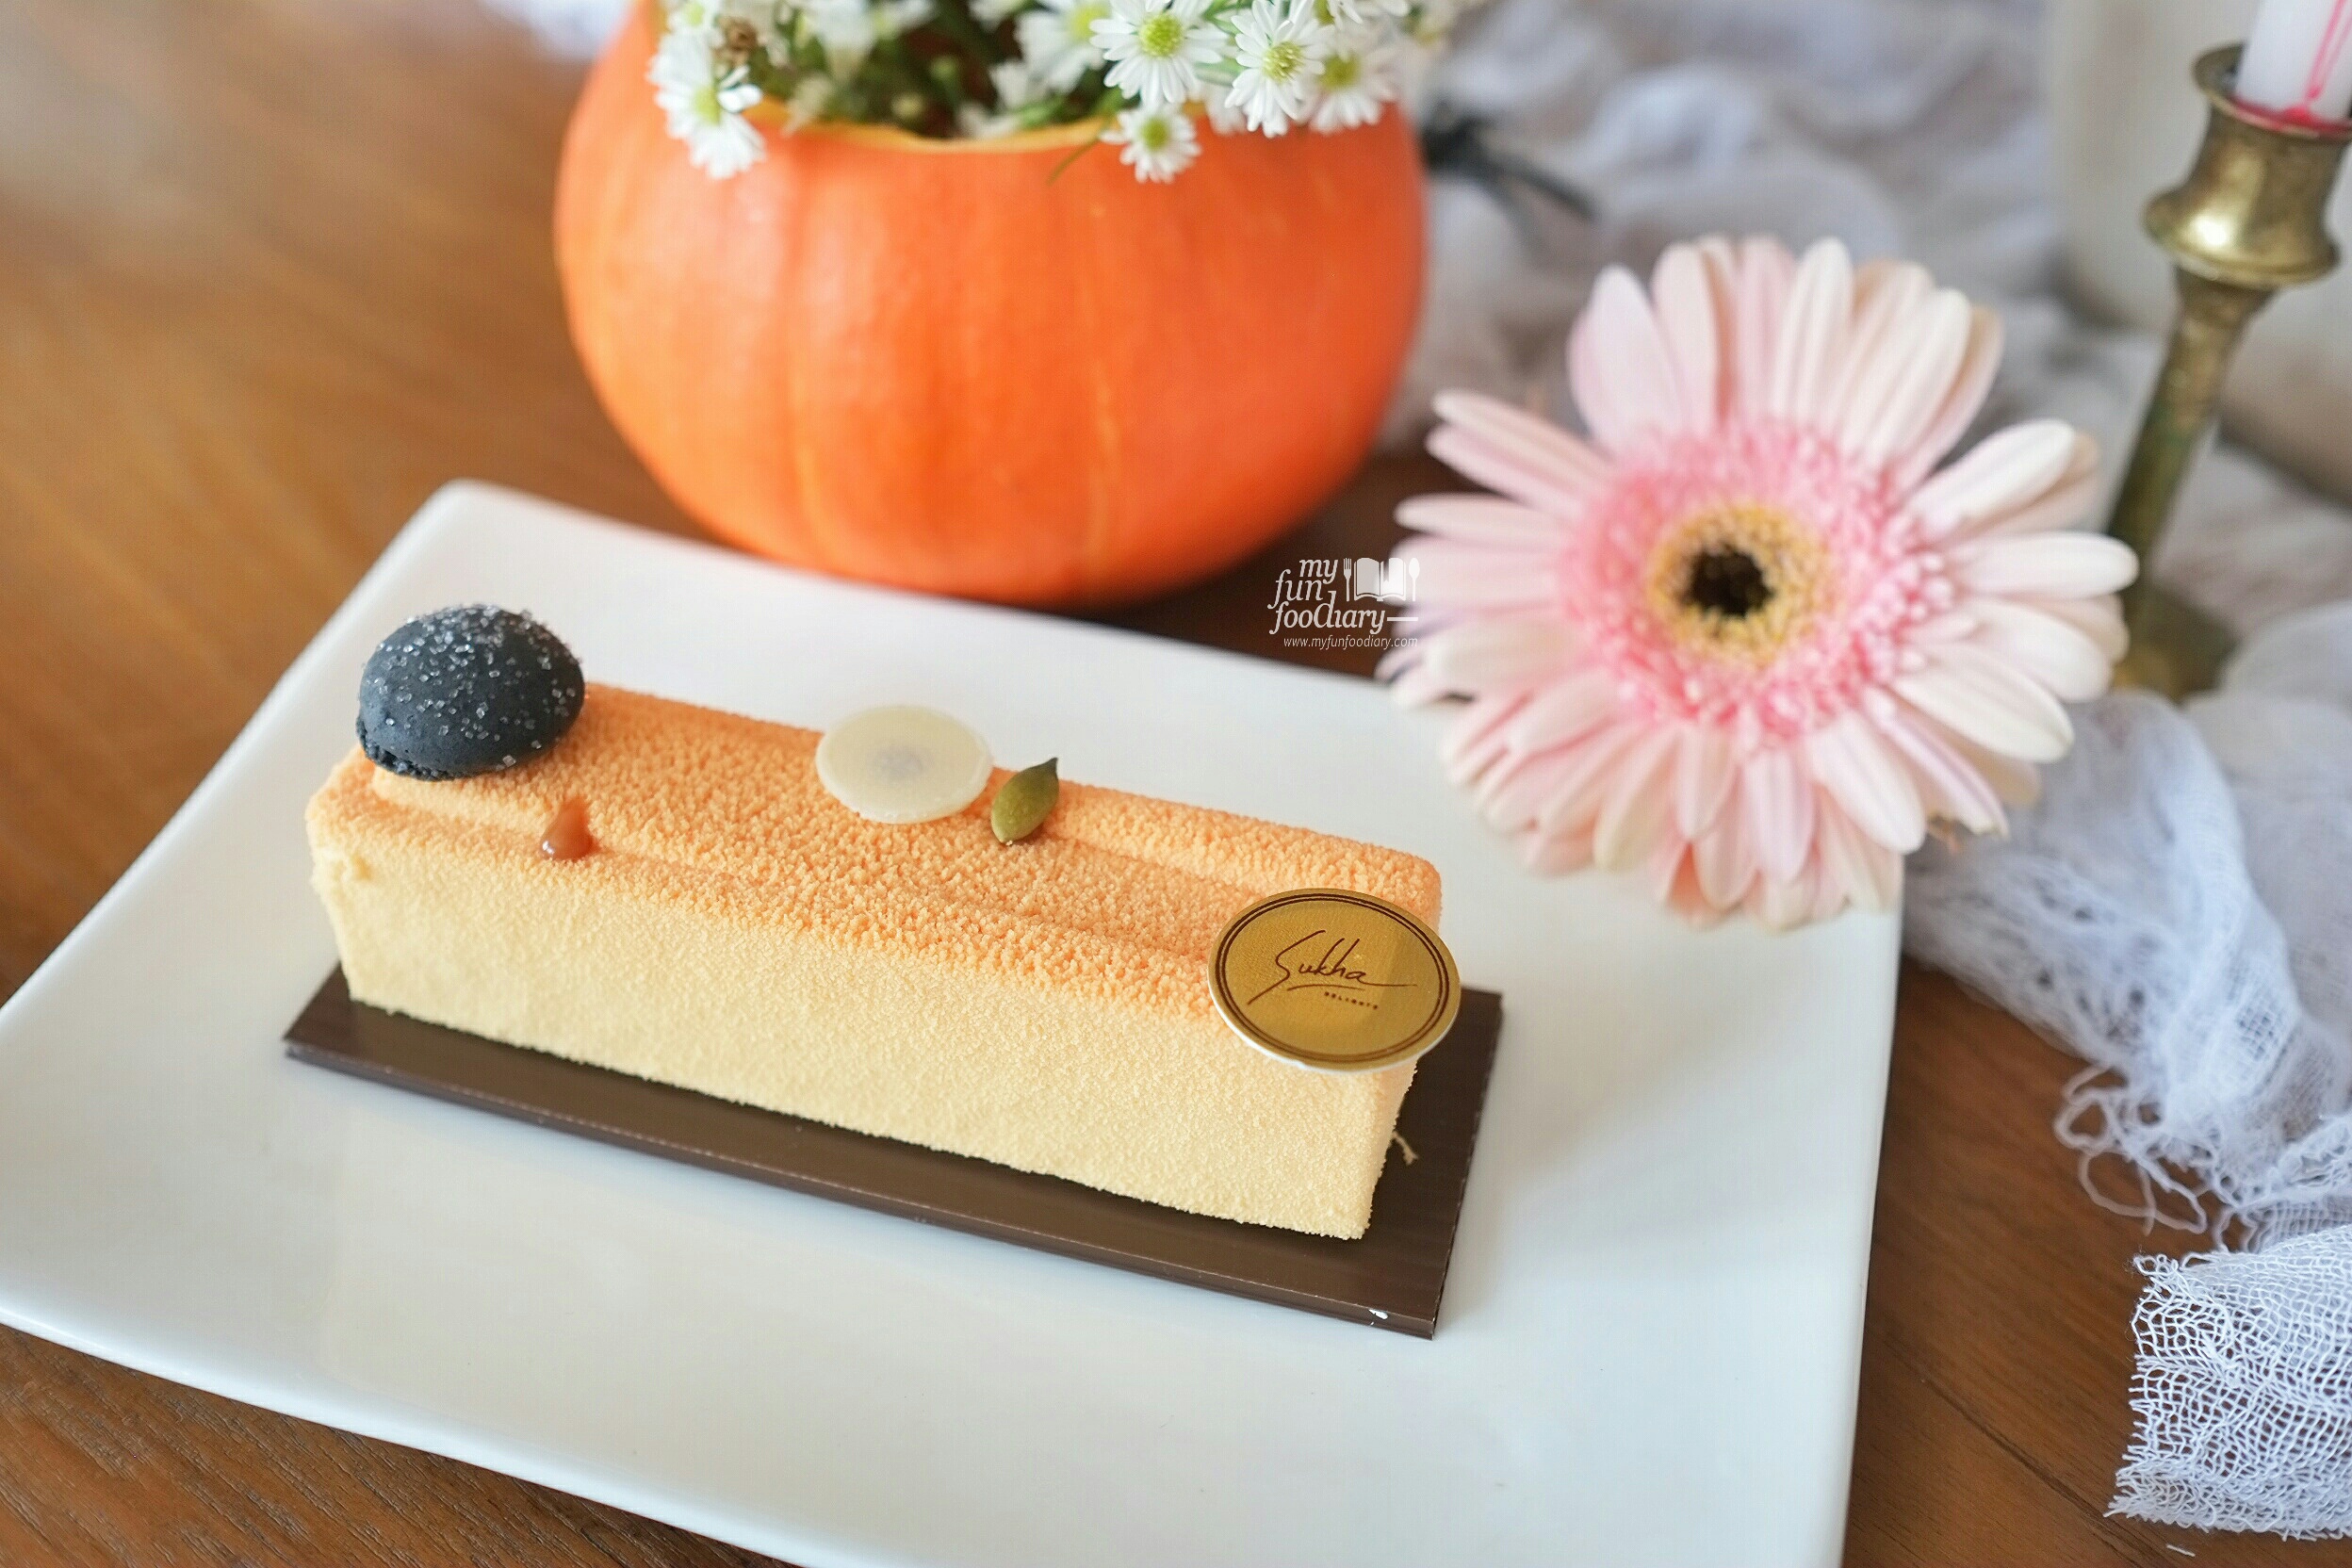 Autumn Cake at Sukha Delights in Bandung by Myfunfoodiary